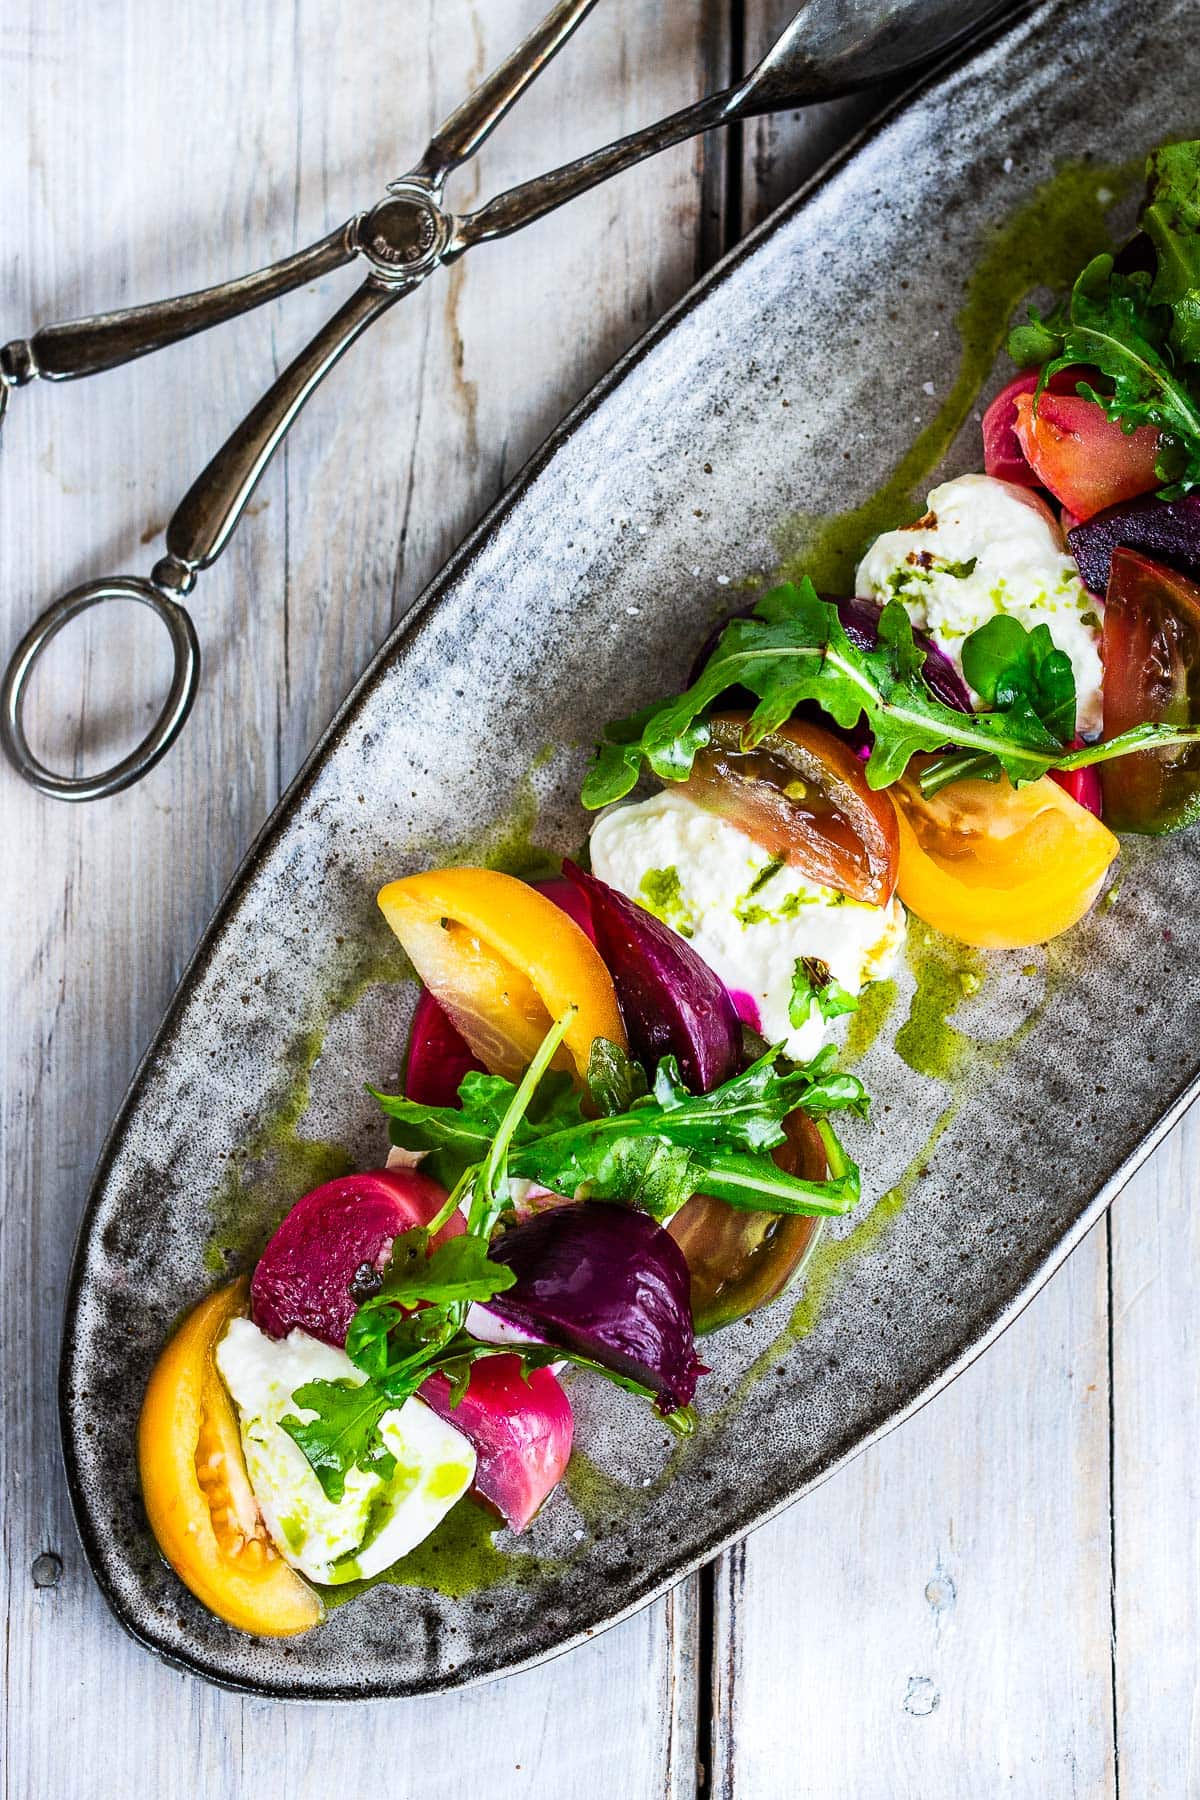 A beautiful Burrata Salad with tomatoes, beets, basil and flavorful basil oil, drizzled with balsamic glaze - perfect for summer dinners and gatherings. Elegant and flavorful.